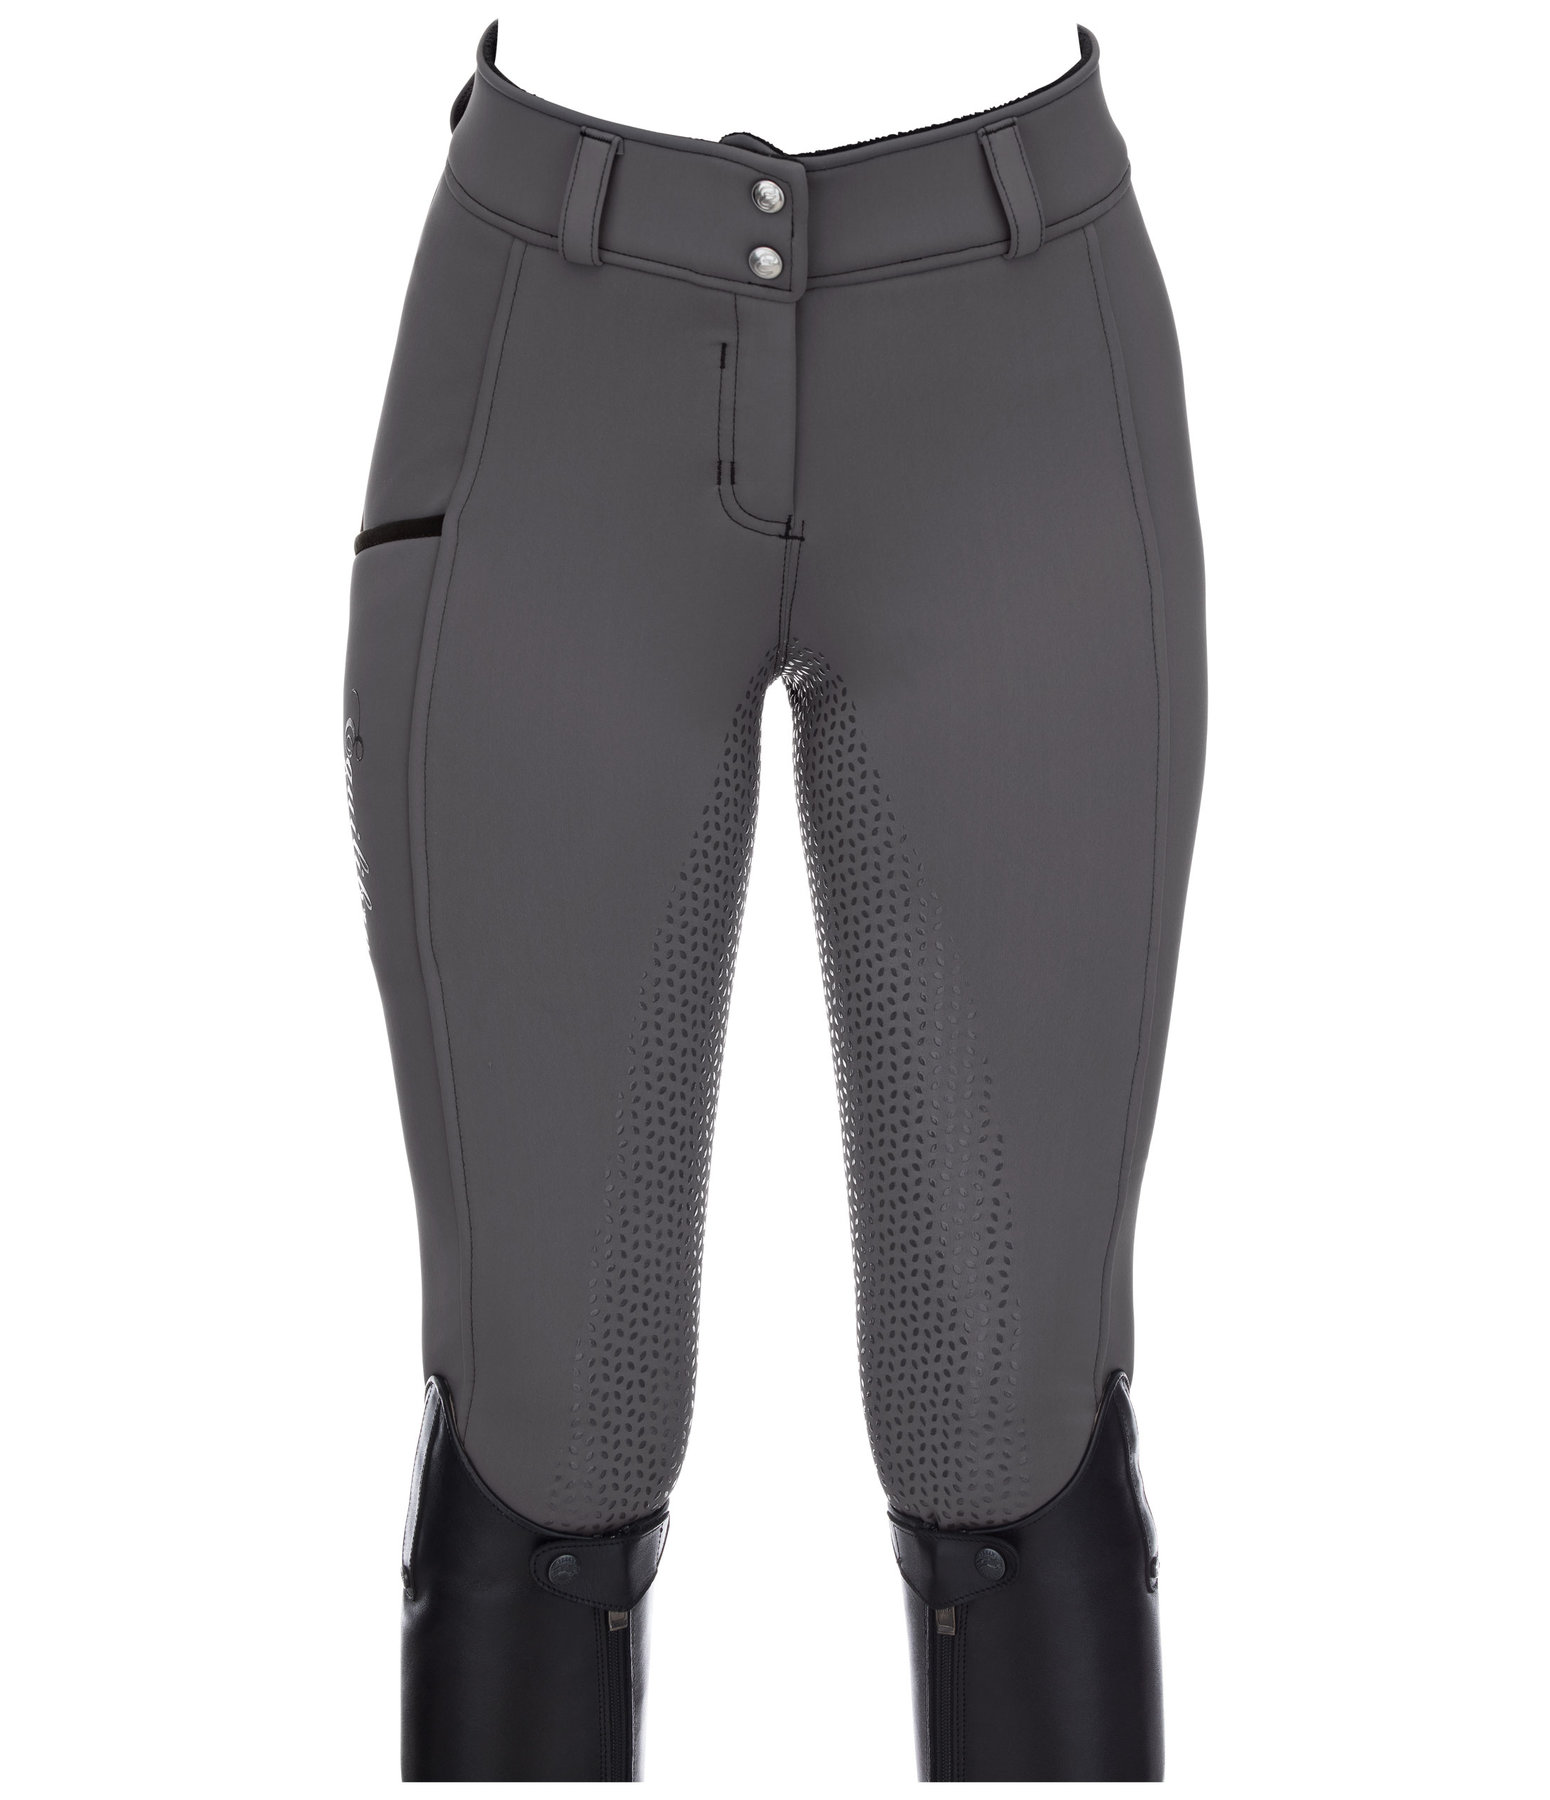 Grip Thermal Full-Seat Breeches Enny